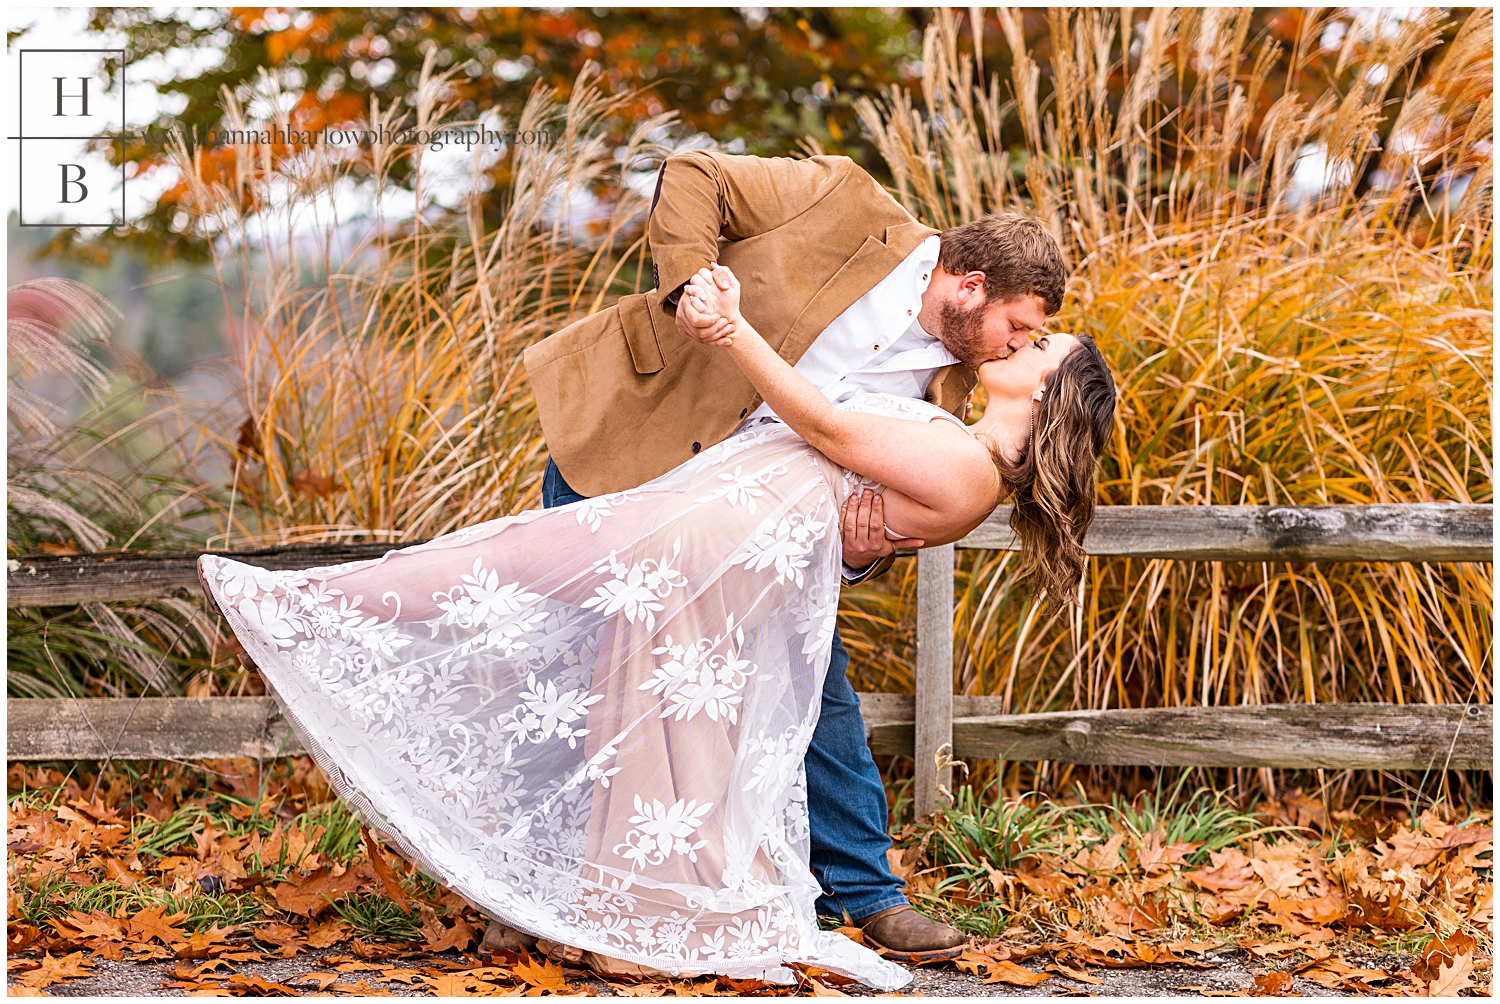 Man dips woman in white lace dress during fall